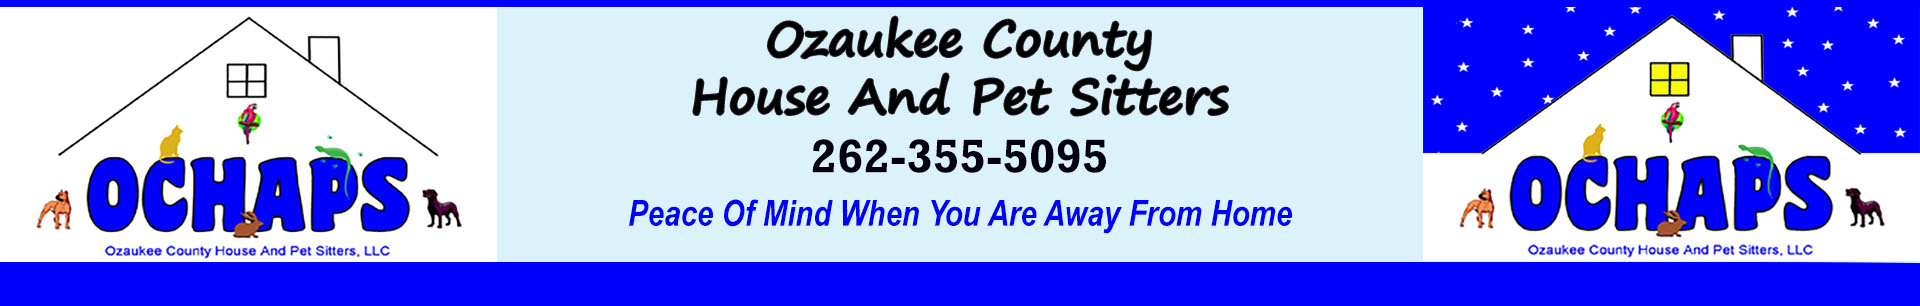 Ozaukee County House and Pet Sitters